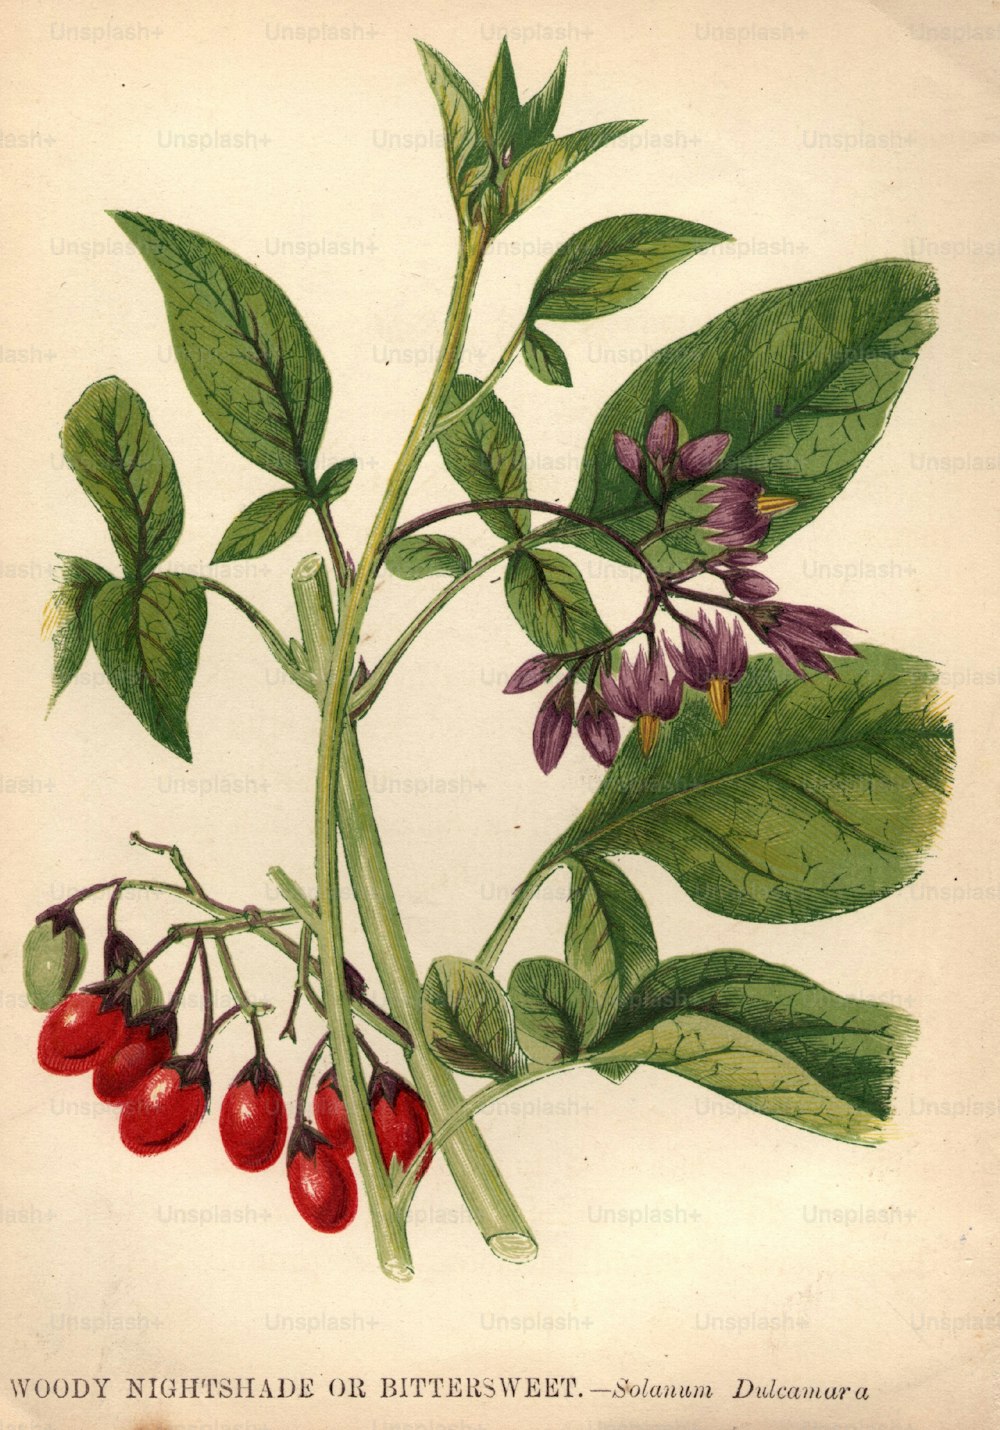 circa 1800:  Solanum dulcamura, woody nightshade or bittersweet.  (Photo by Hulton Archive/Getty Images)